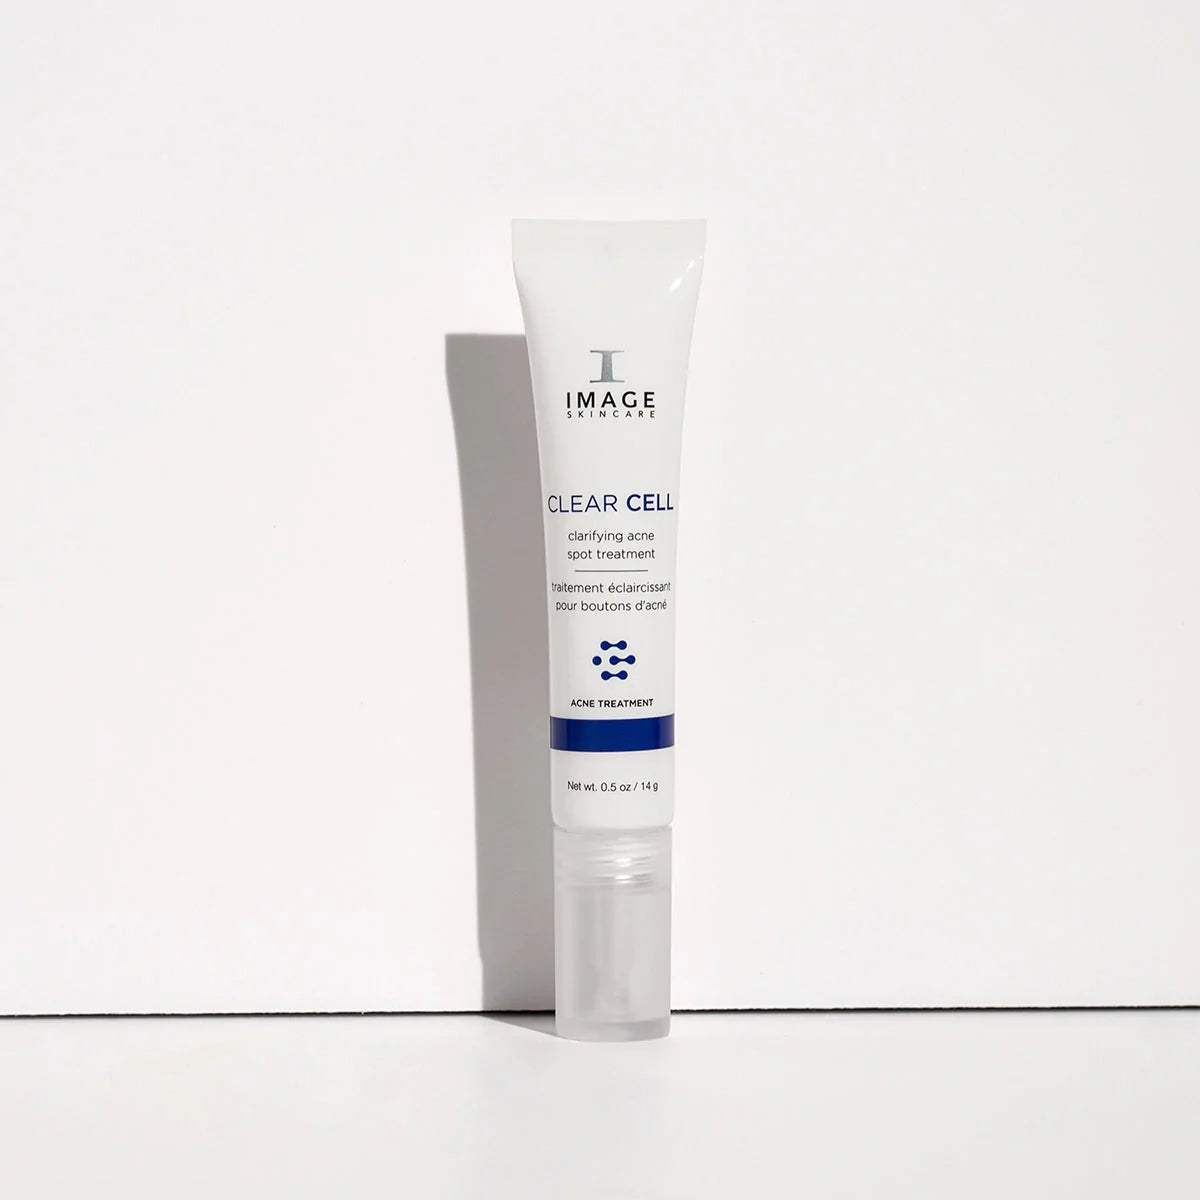 Image Skincare Clear Cell Clarifying Acne Spot Treatment